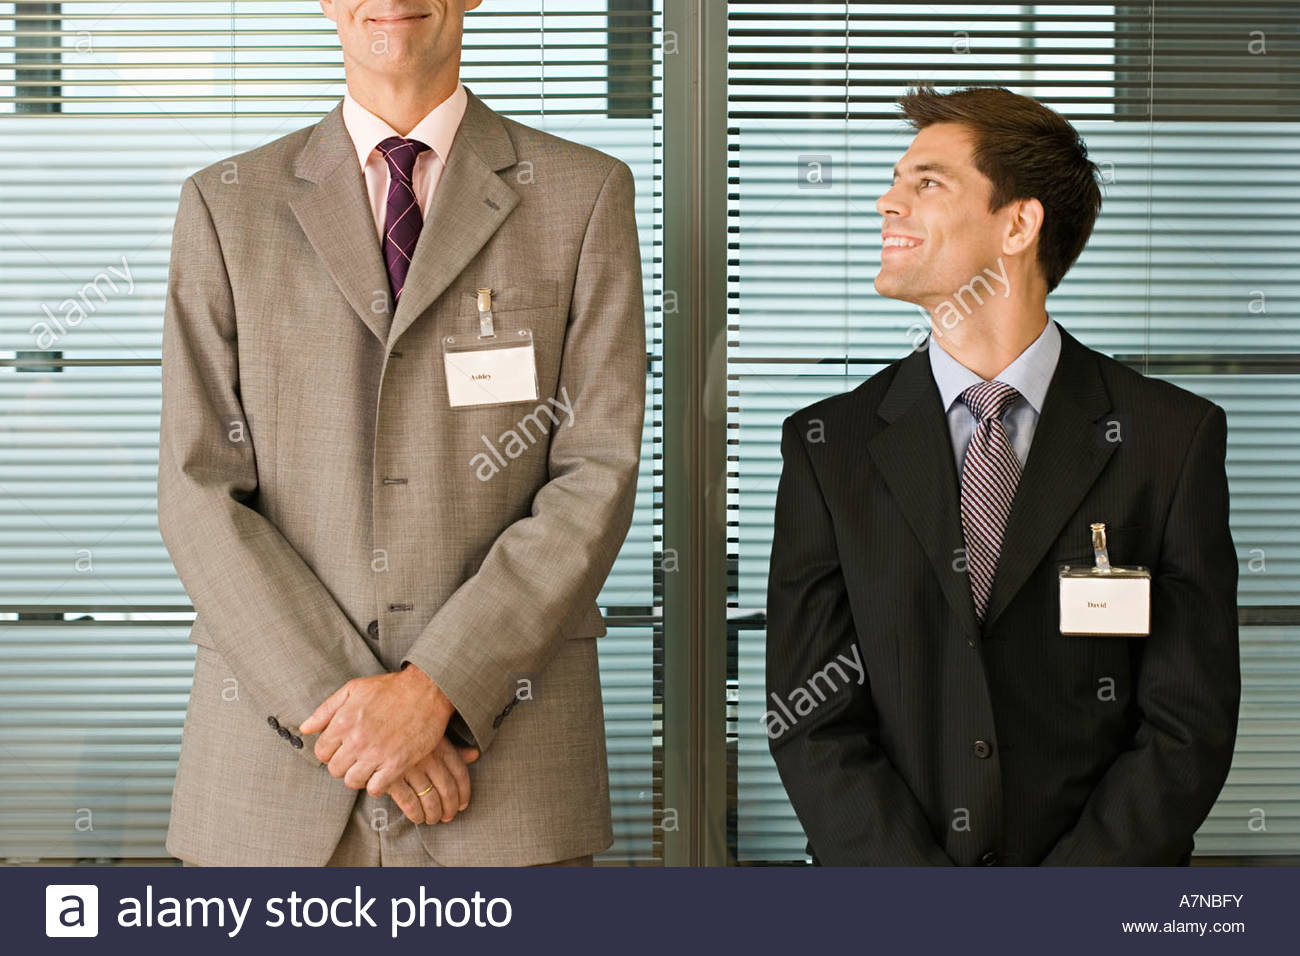 short-businessman-looking-up-at-tall-businessman-standing-side-by-A7NBFY.jpg